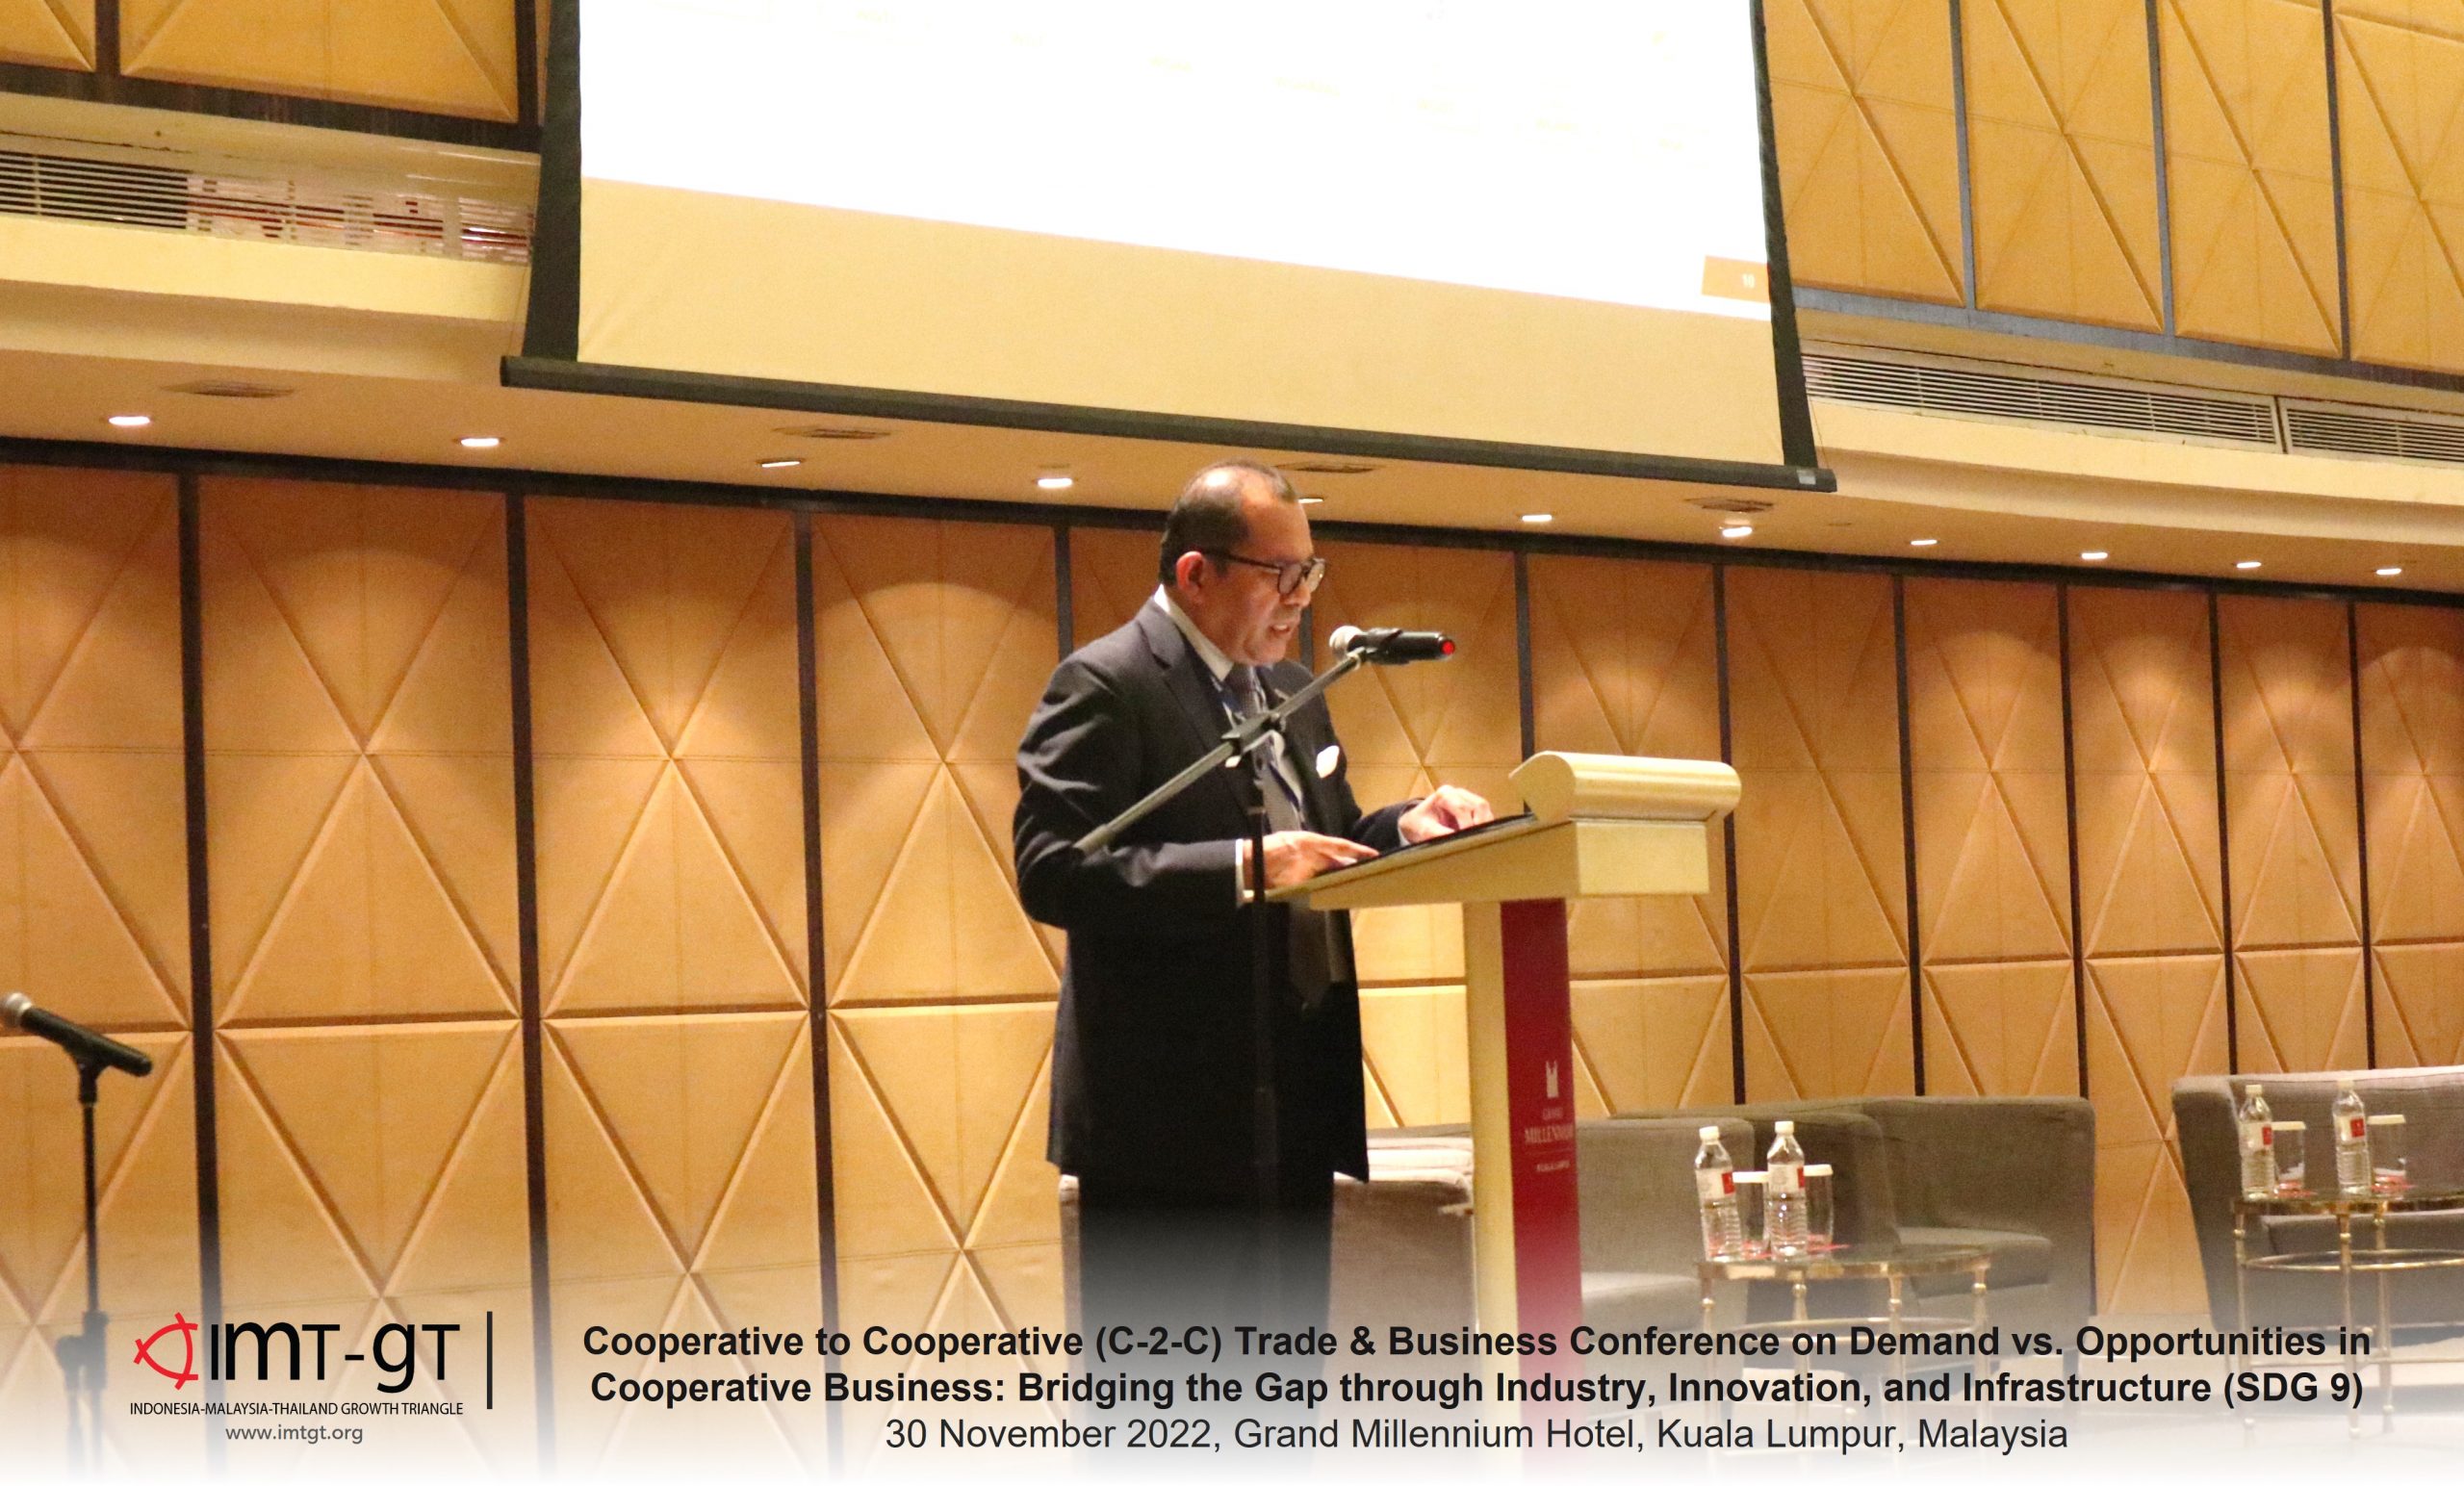 COOPERATIVE (C-2-C) TRADE AND BUSINESS CONFERENCE